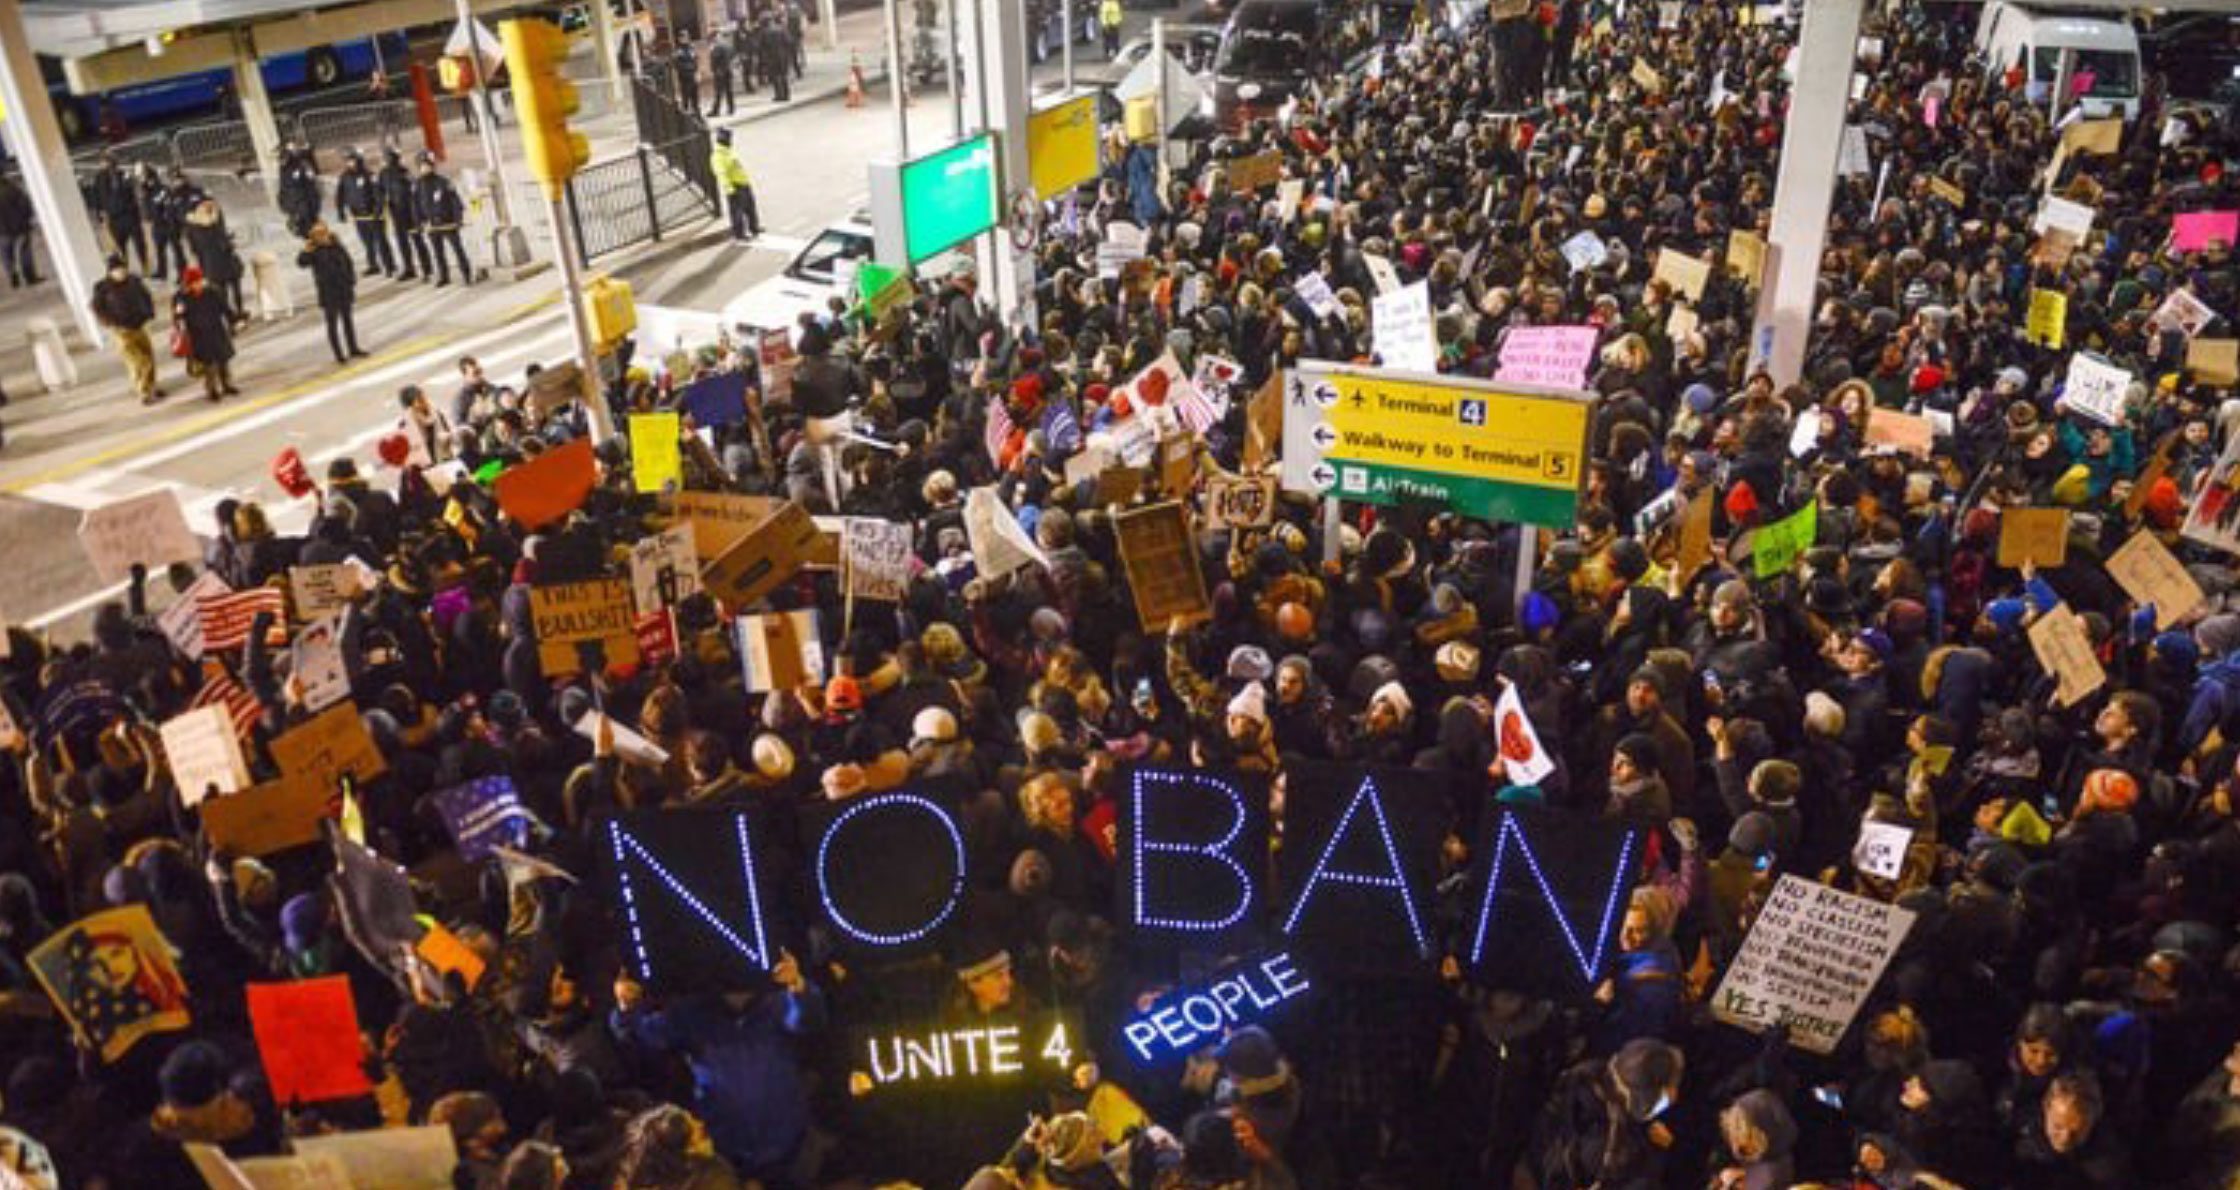 Are Refugees Welcome Here? Trump, Immigration, and Canadian Responses